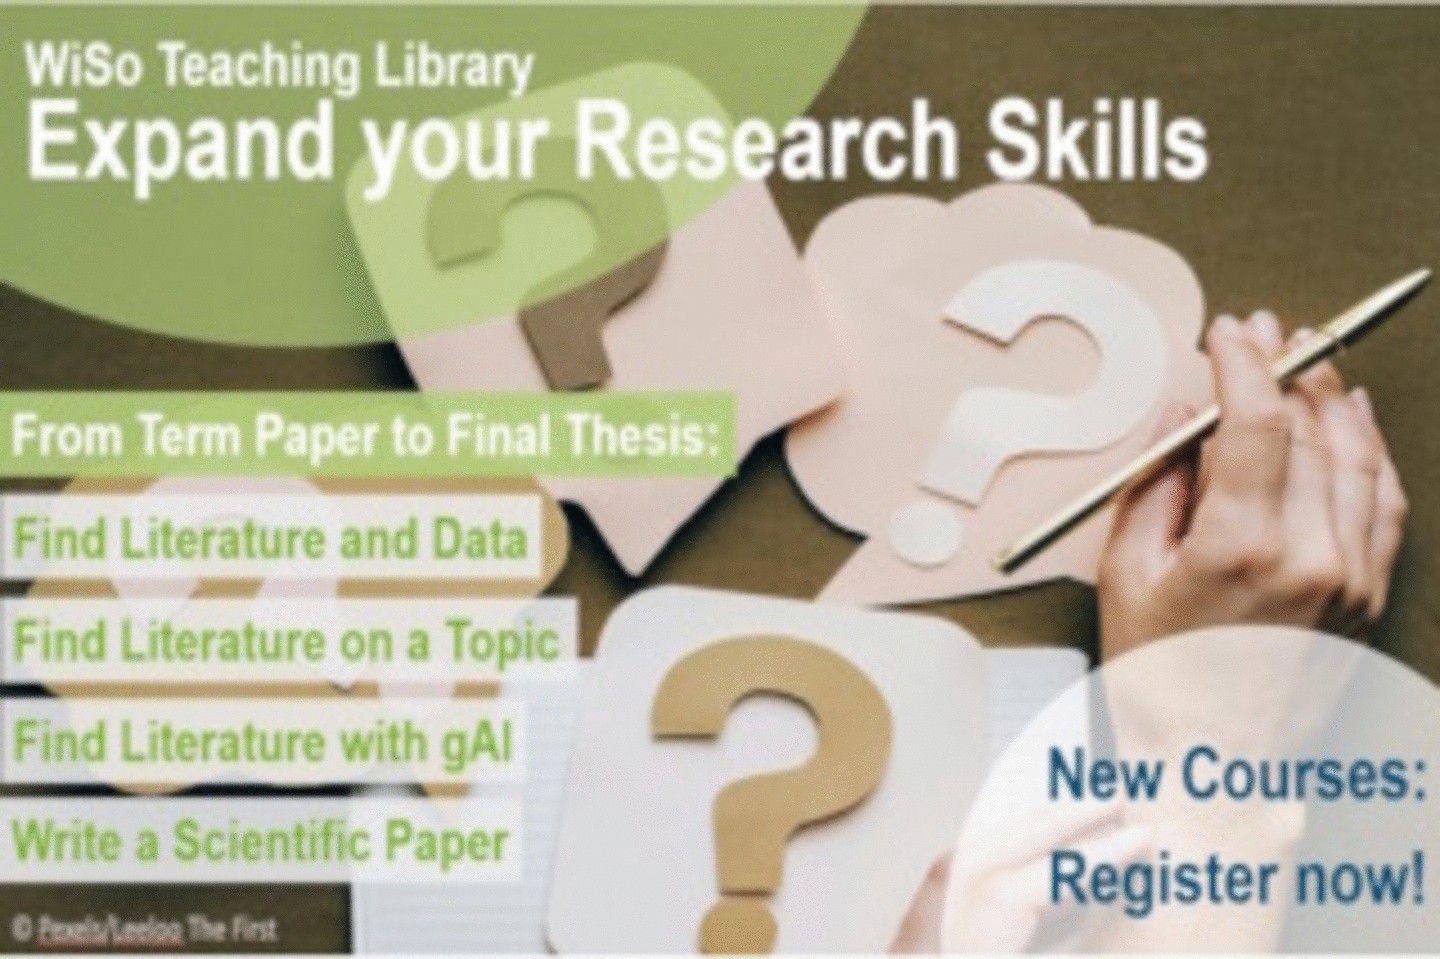 Level up your Research Skills